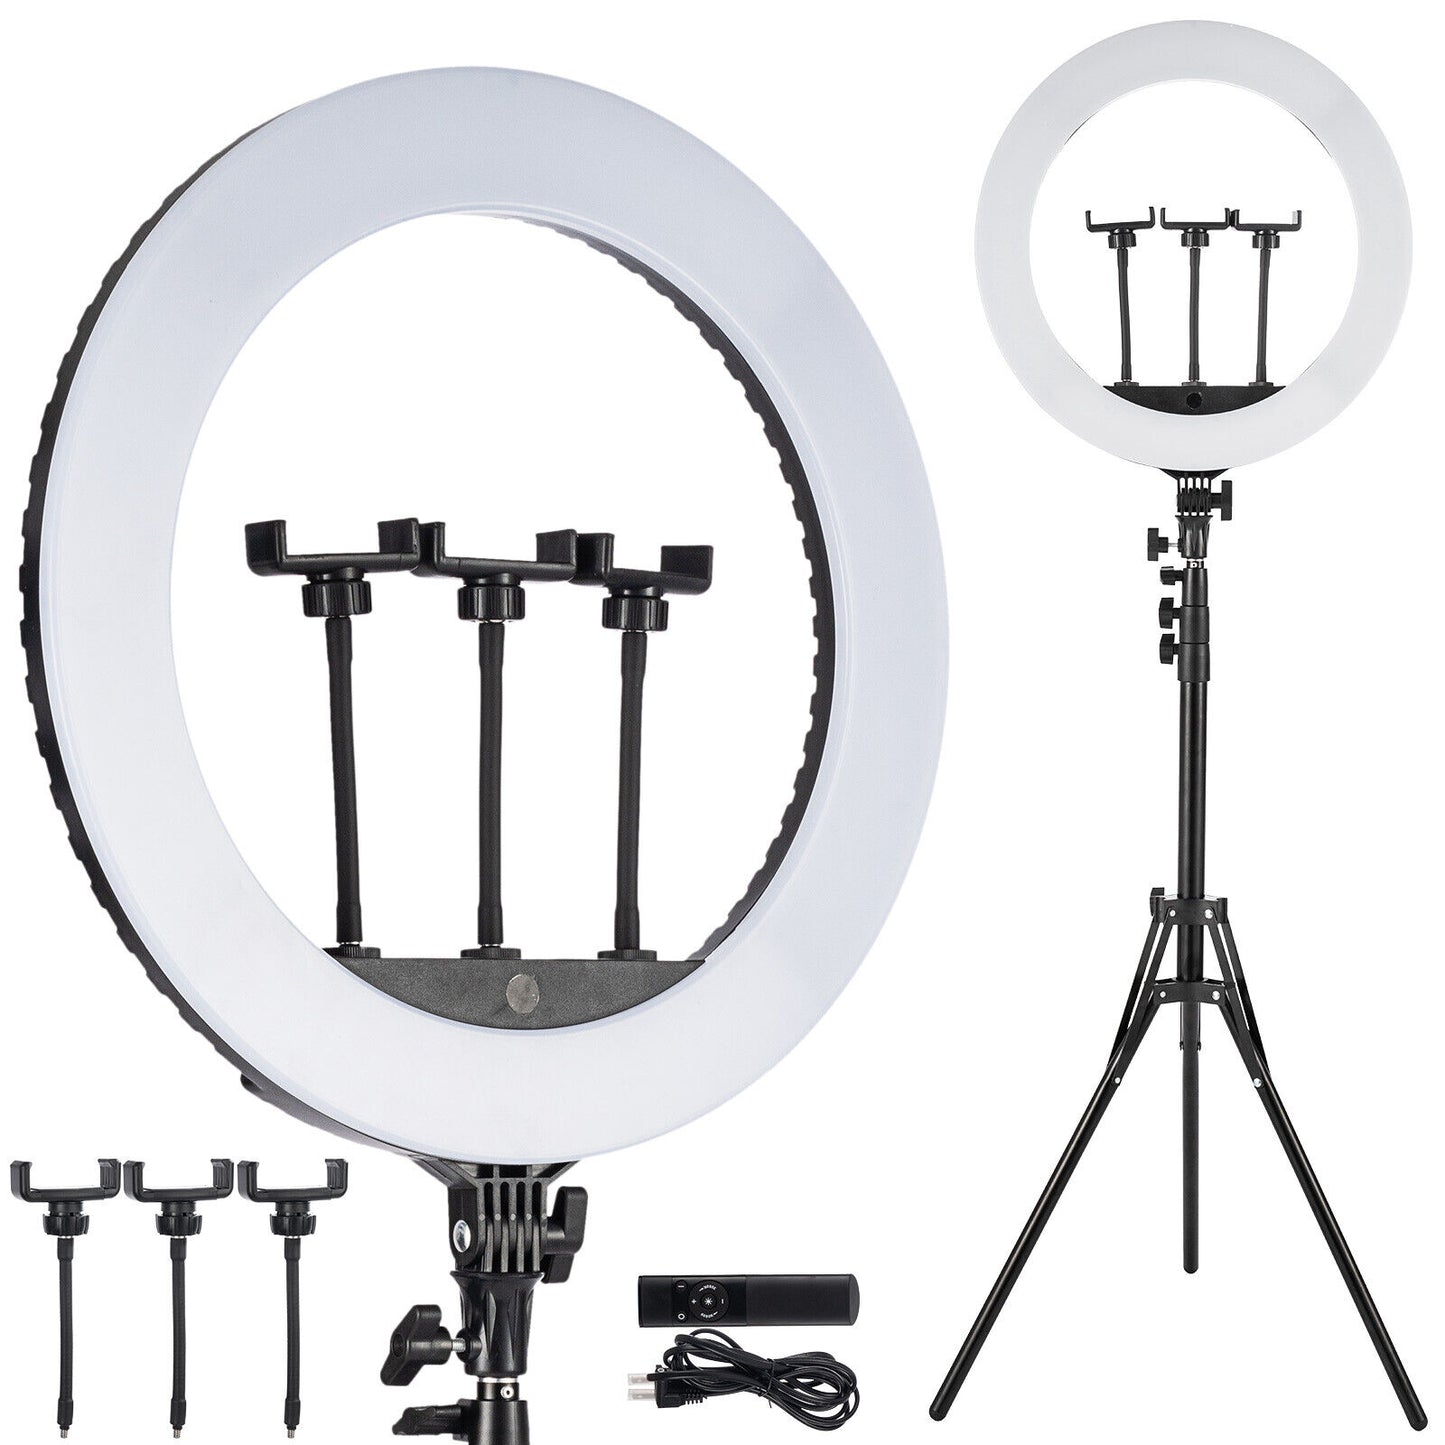 18" LED Ring Light Kit with Stand For Social Media/Beauty Shoot/Photography